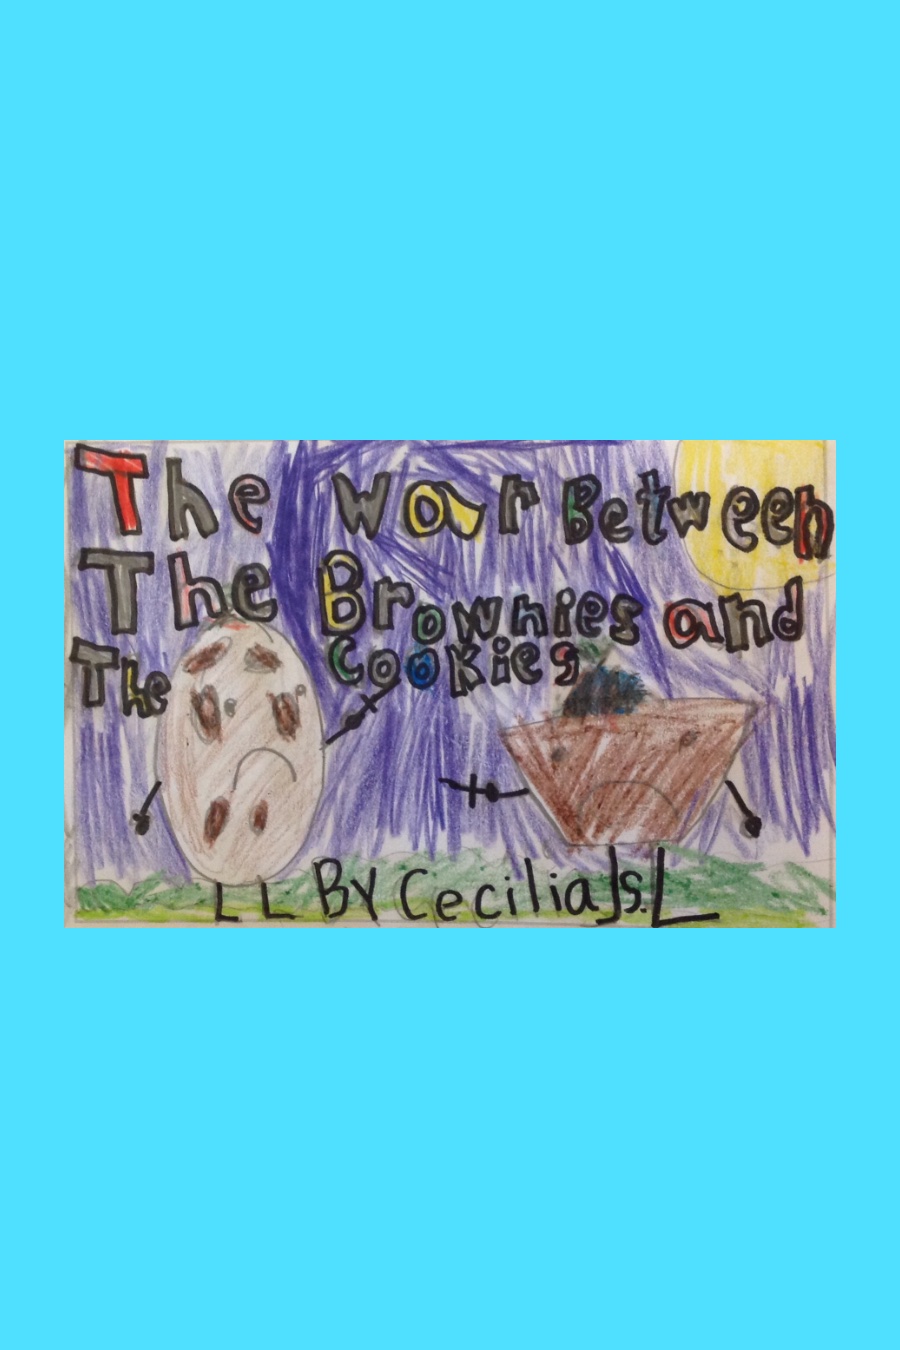 The War Between the Brownies and the Cookies by Cecilia S